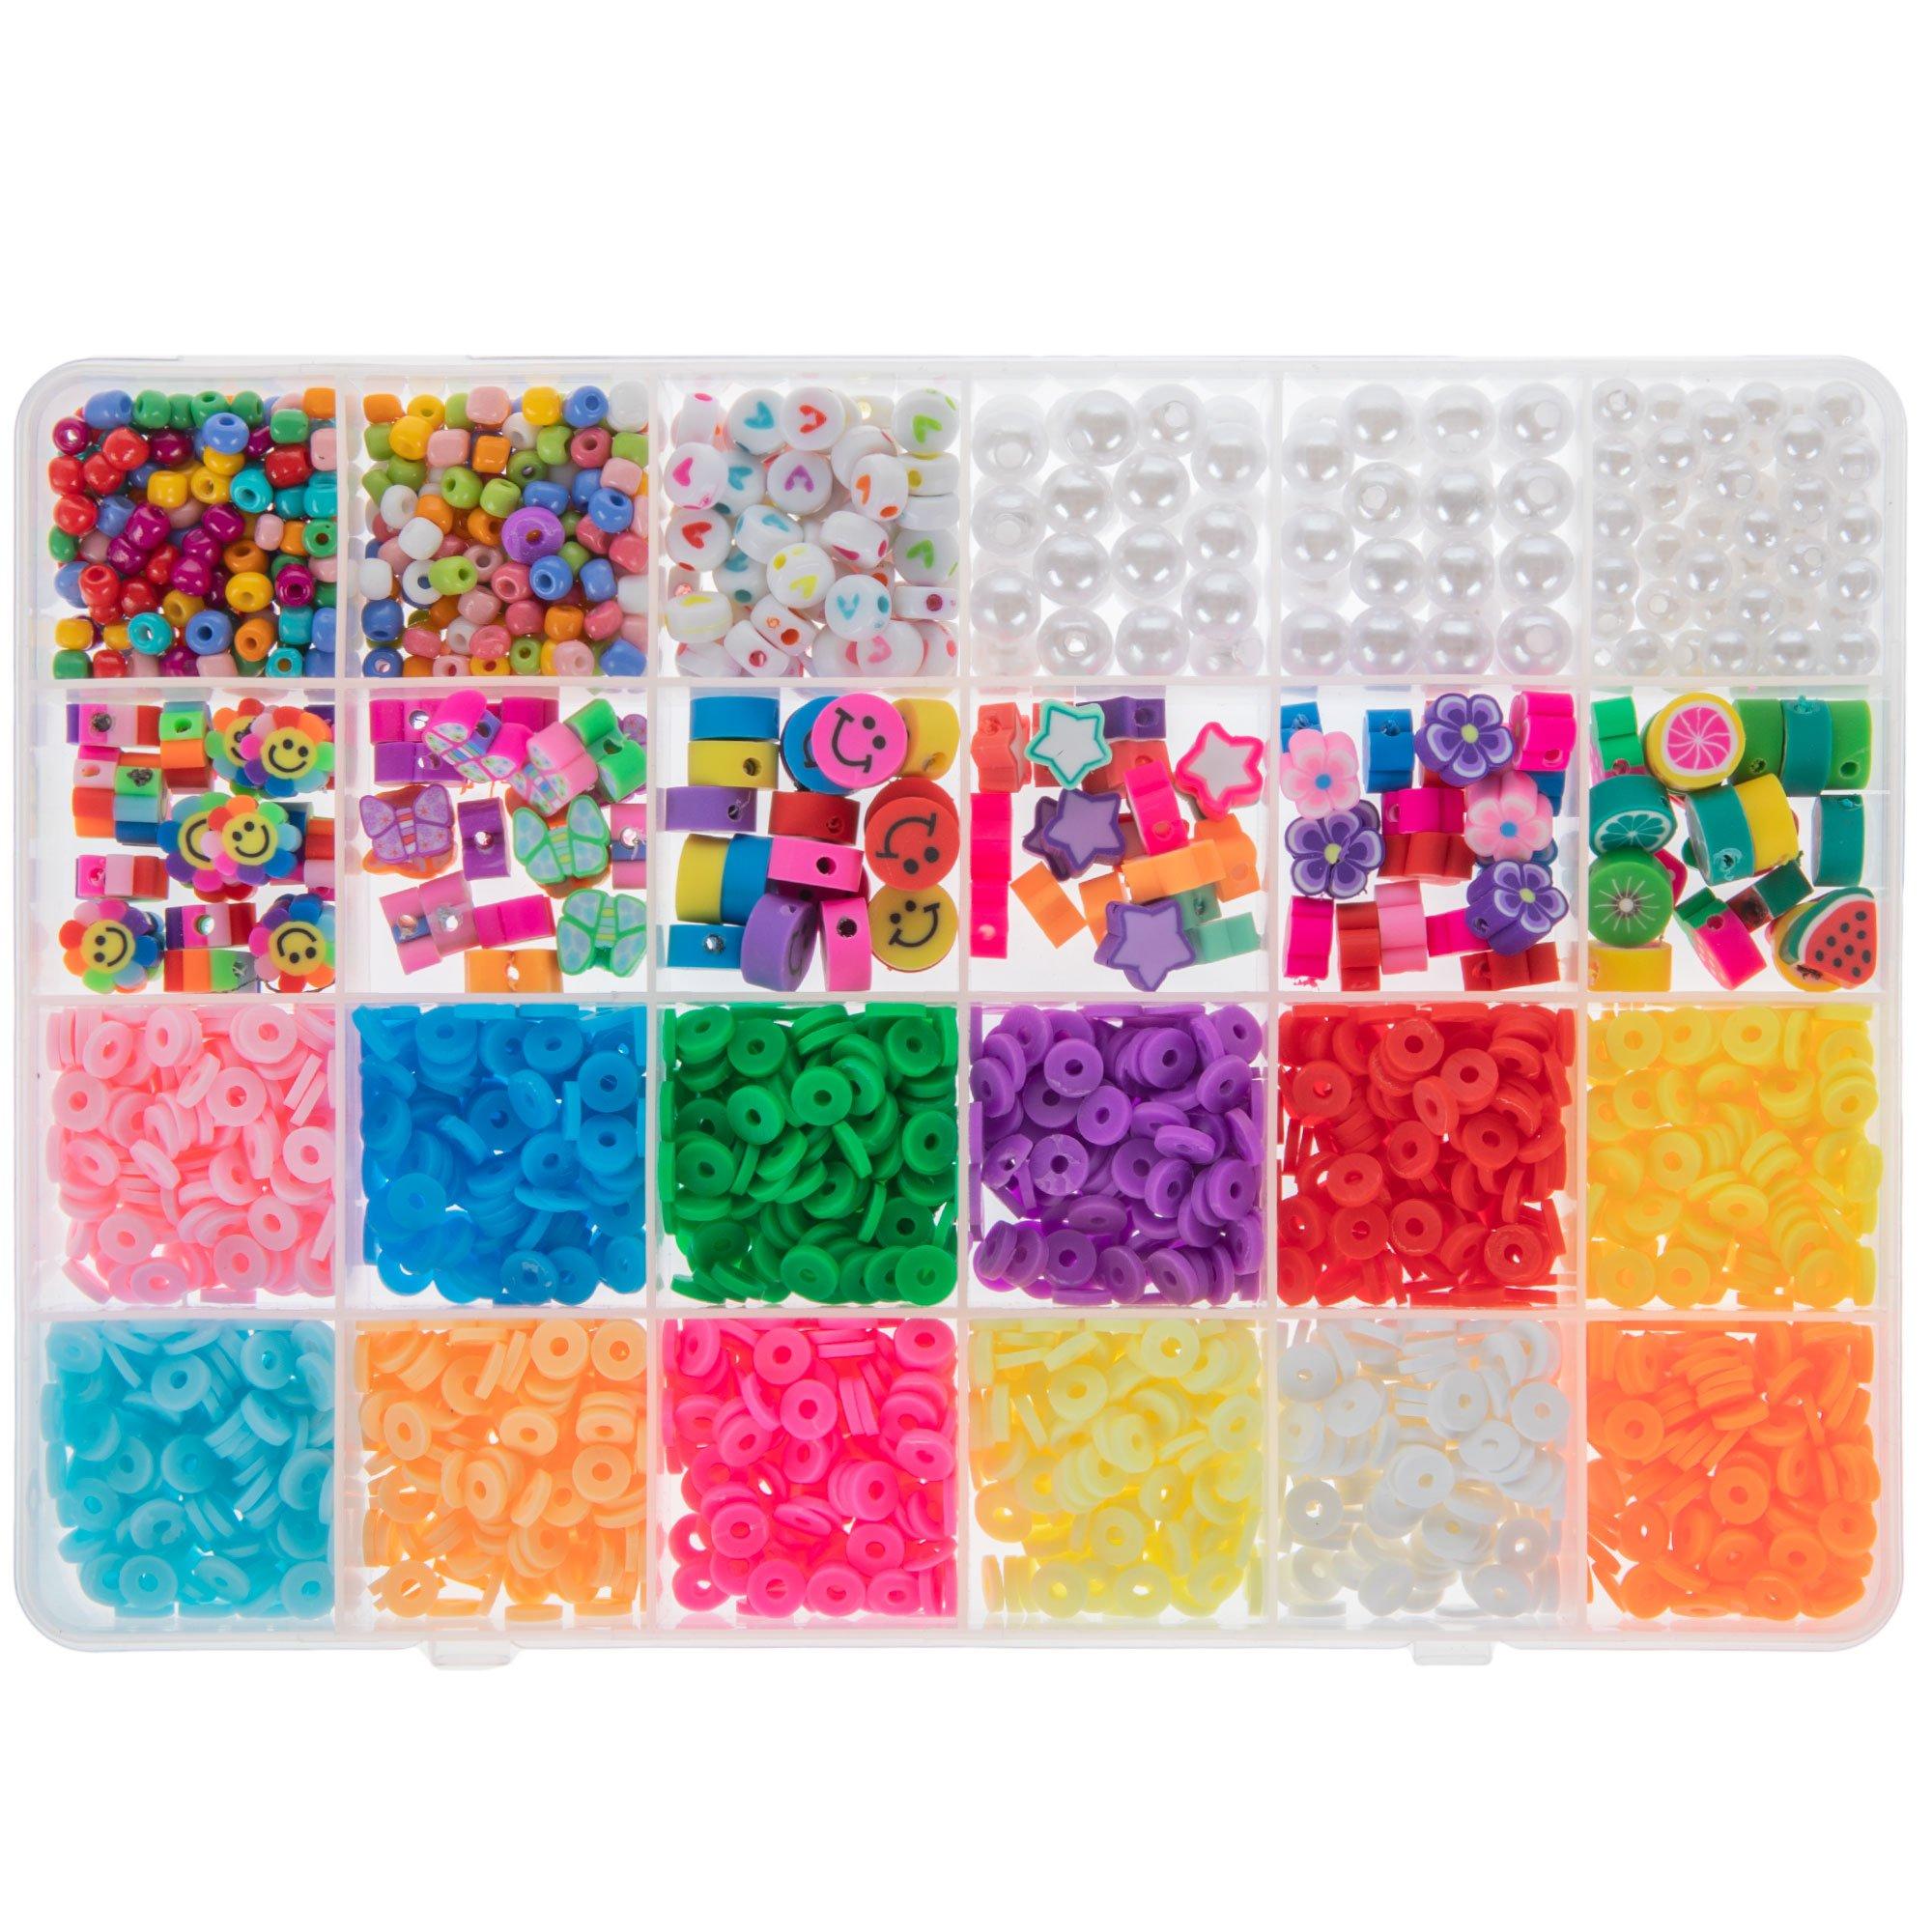 Sm. Priority Box Completely FULL of Little Baggies of Seed & Bugle Beads  asst Colorsno Choice..pounds of Beads 